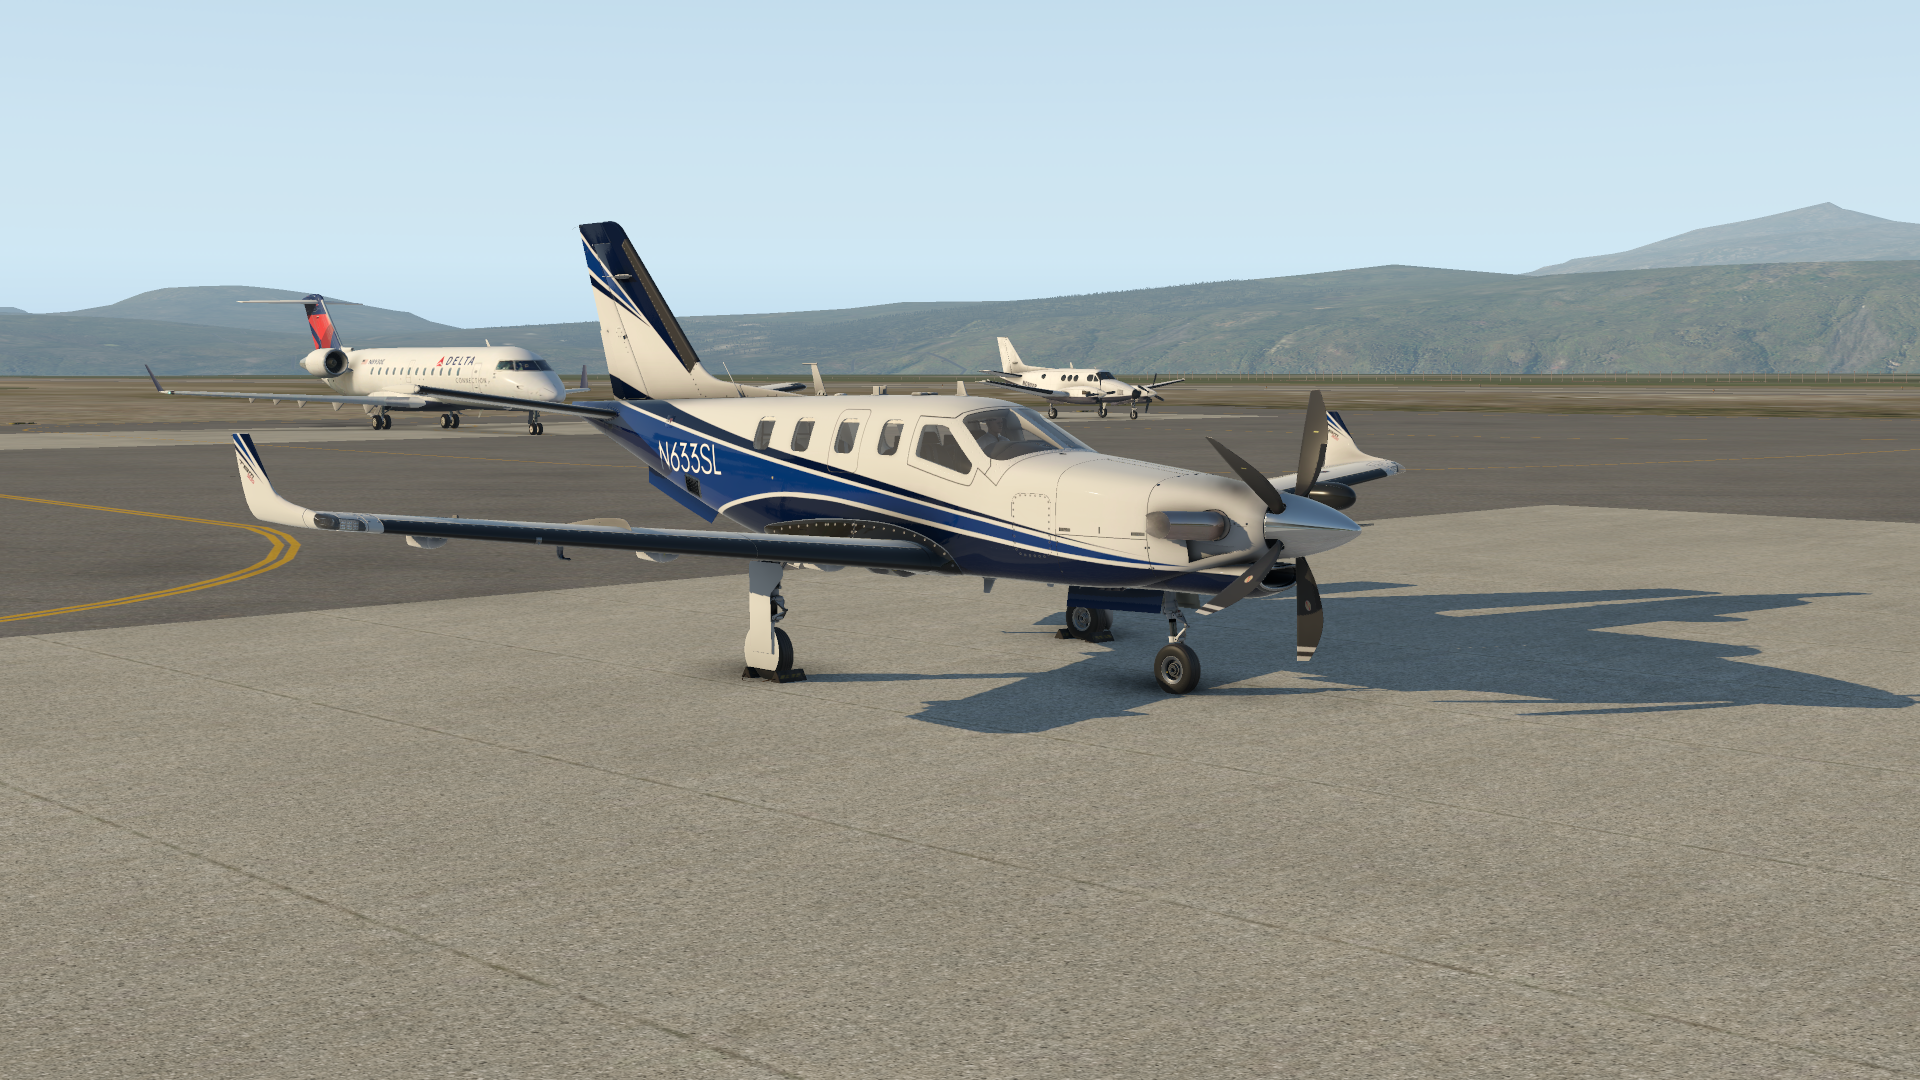 MEC-263 on the ramp @ BGBW after arrival from BIKF in a shiny new TBM-900. Love this aircraft. 